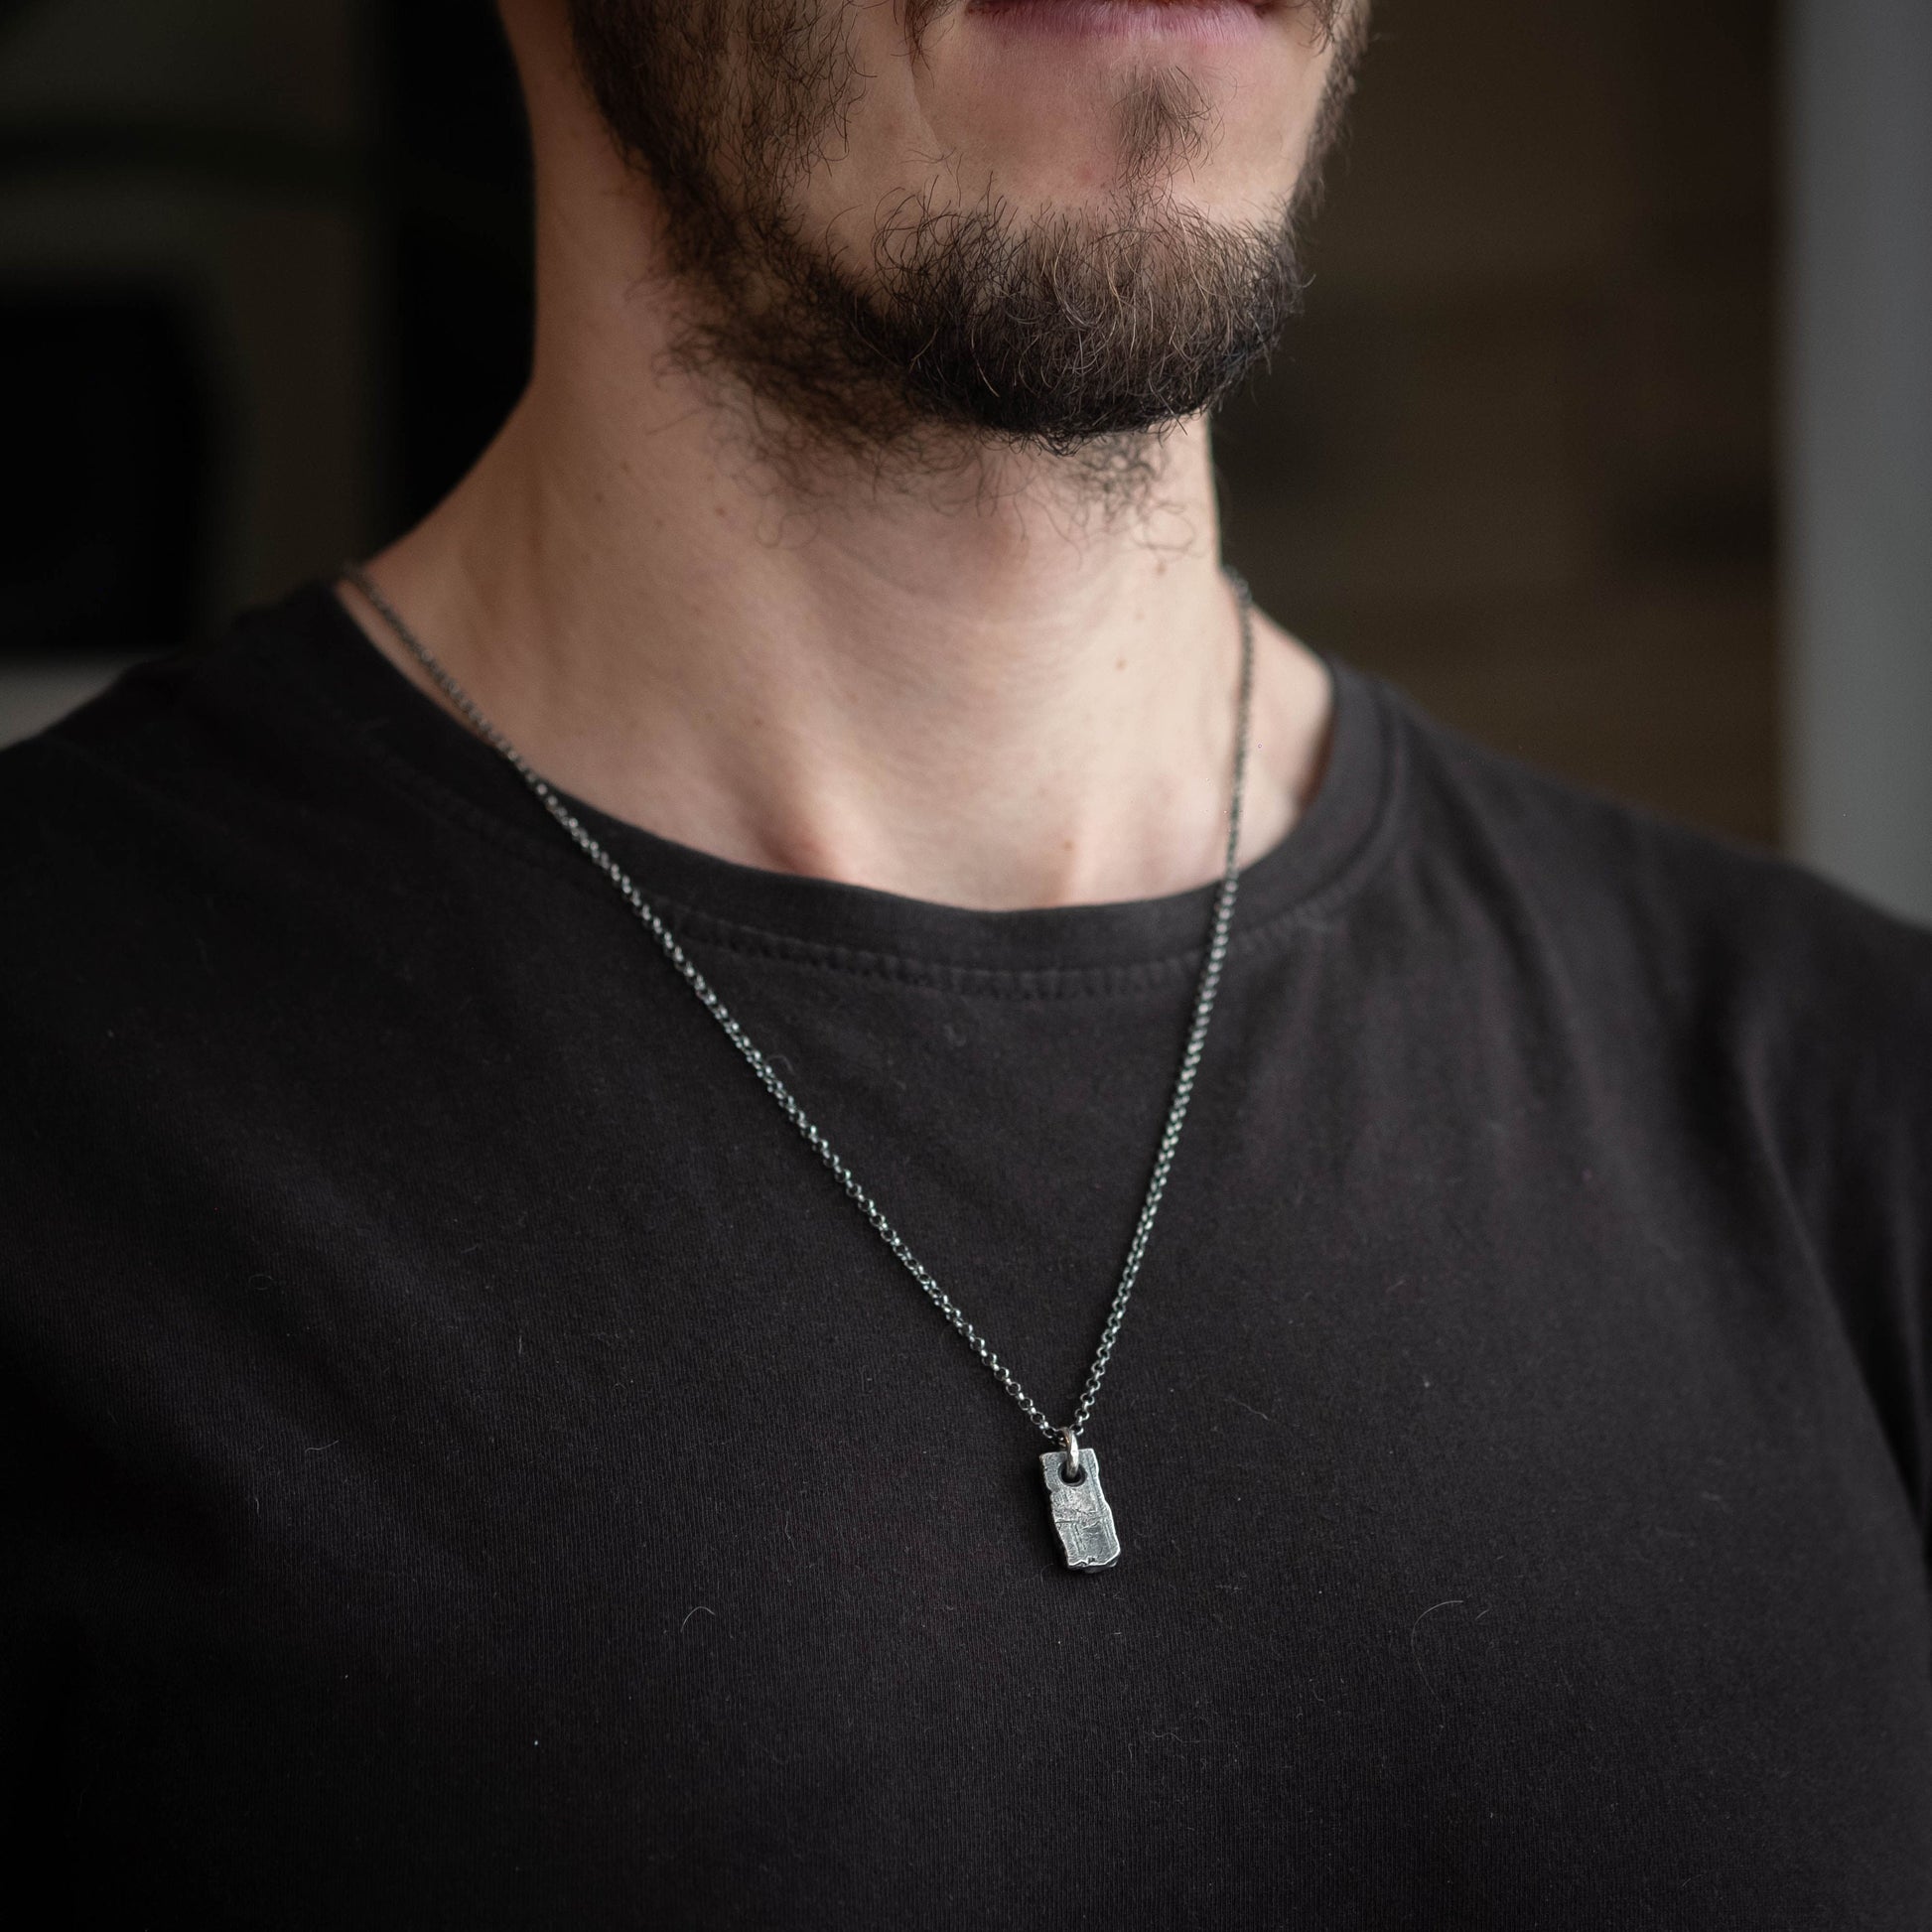 Rustic Mens Silver protection pendant necklace, Unique Mens gift,  Handmade Silver jewelry, Gift for him, Boyfriend gift, Husbant gift